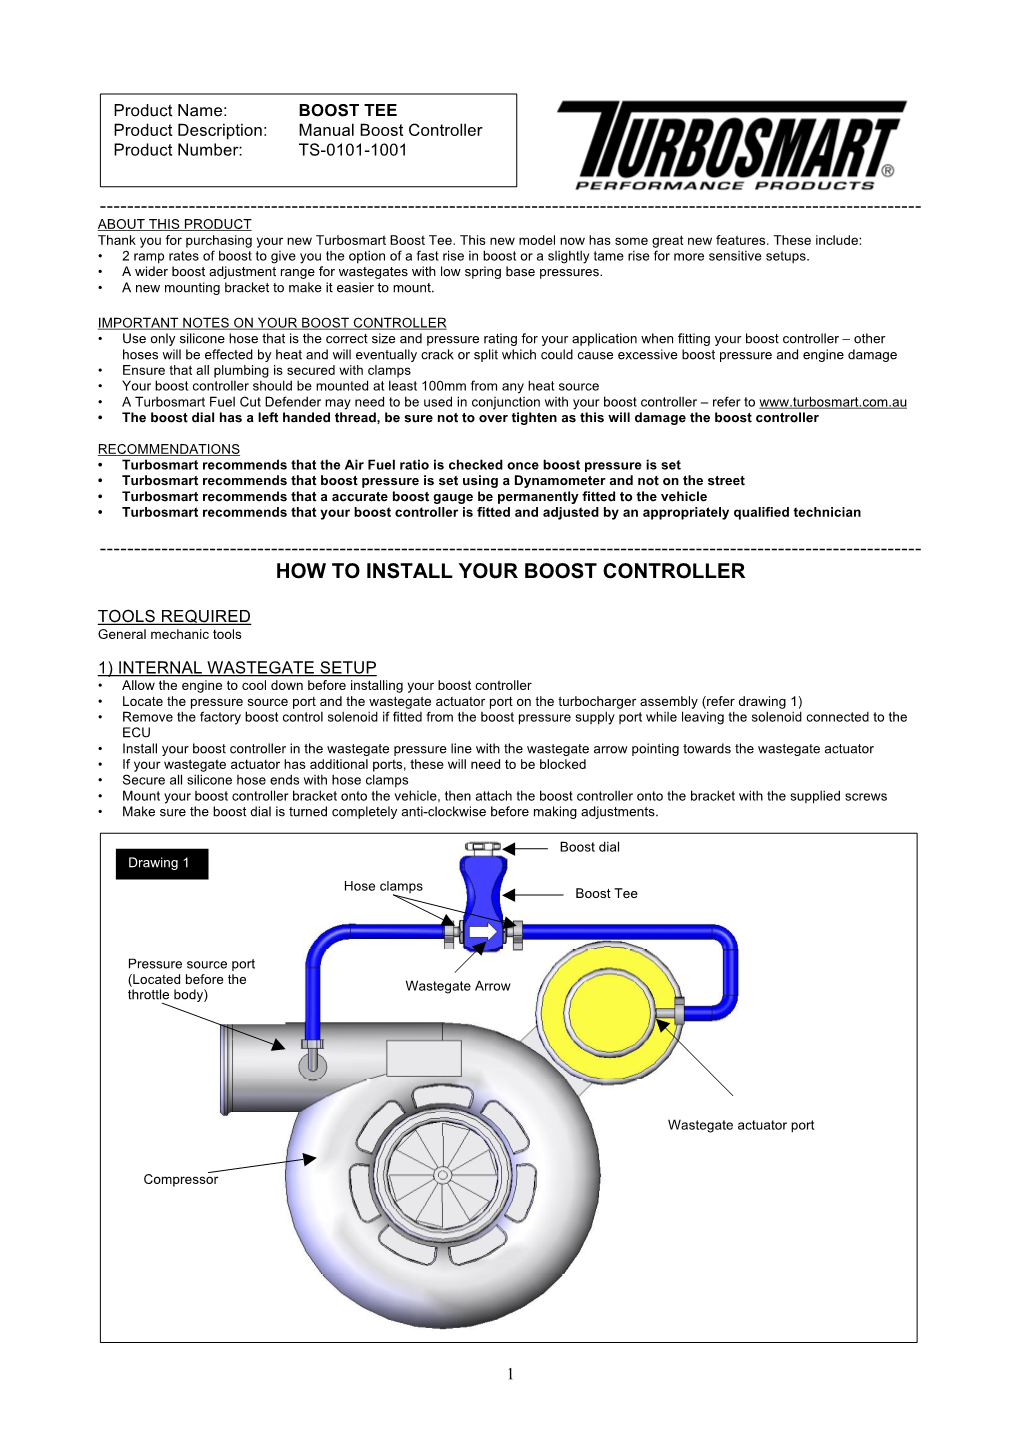 BOOST TEE Product Description: Manual Boost Controller Product Number: TS-0101-1001